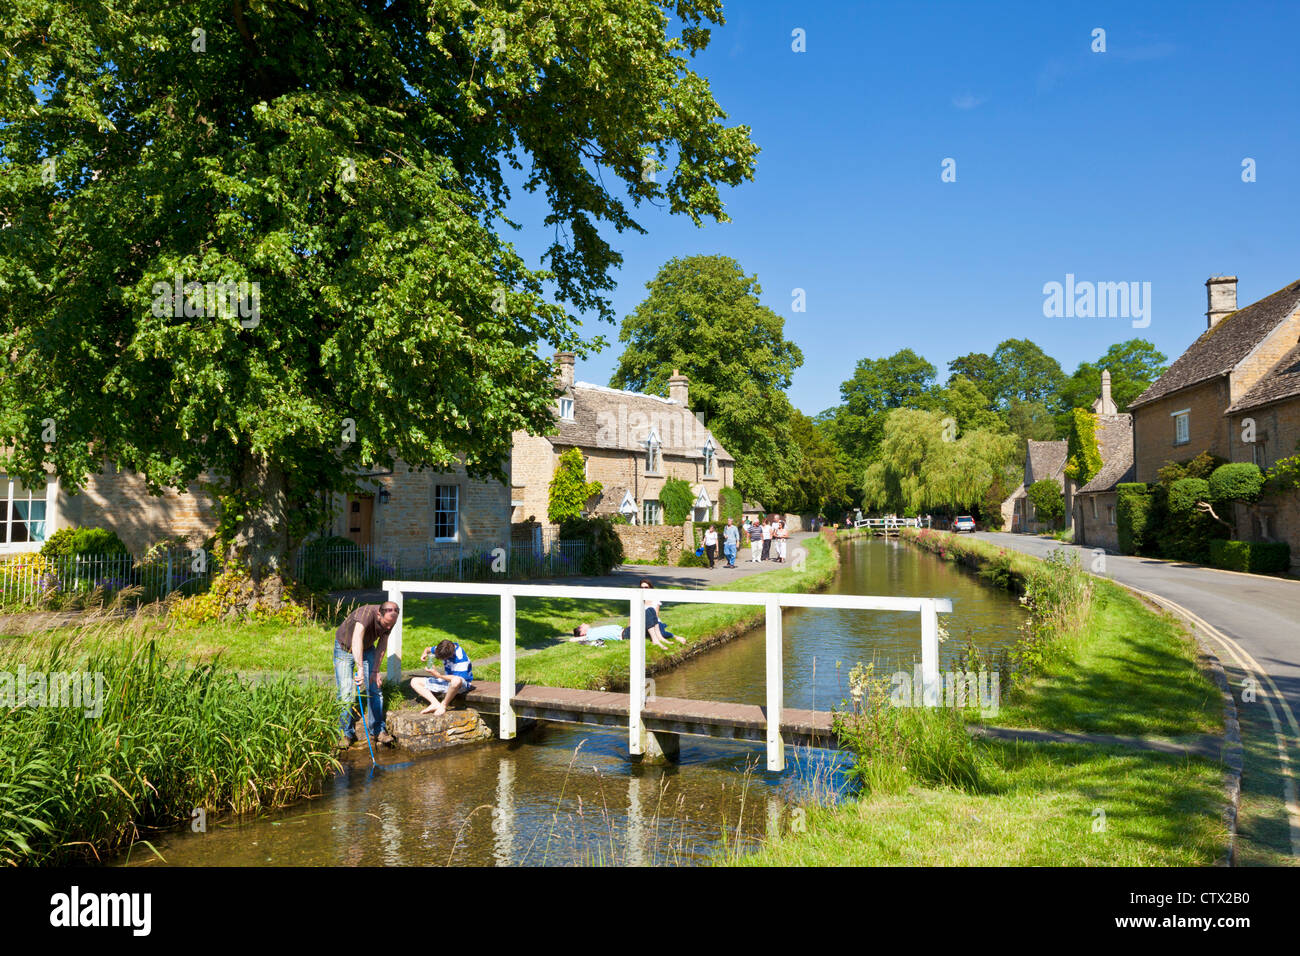 Lower Slaughter Village Cotswolds Gloucestershire England Regno Unito GB EU Europe Foto Stock